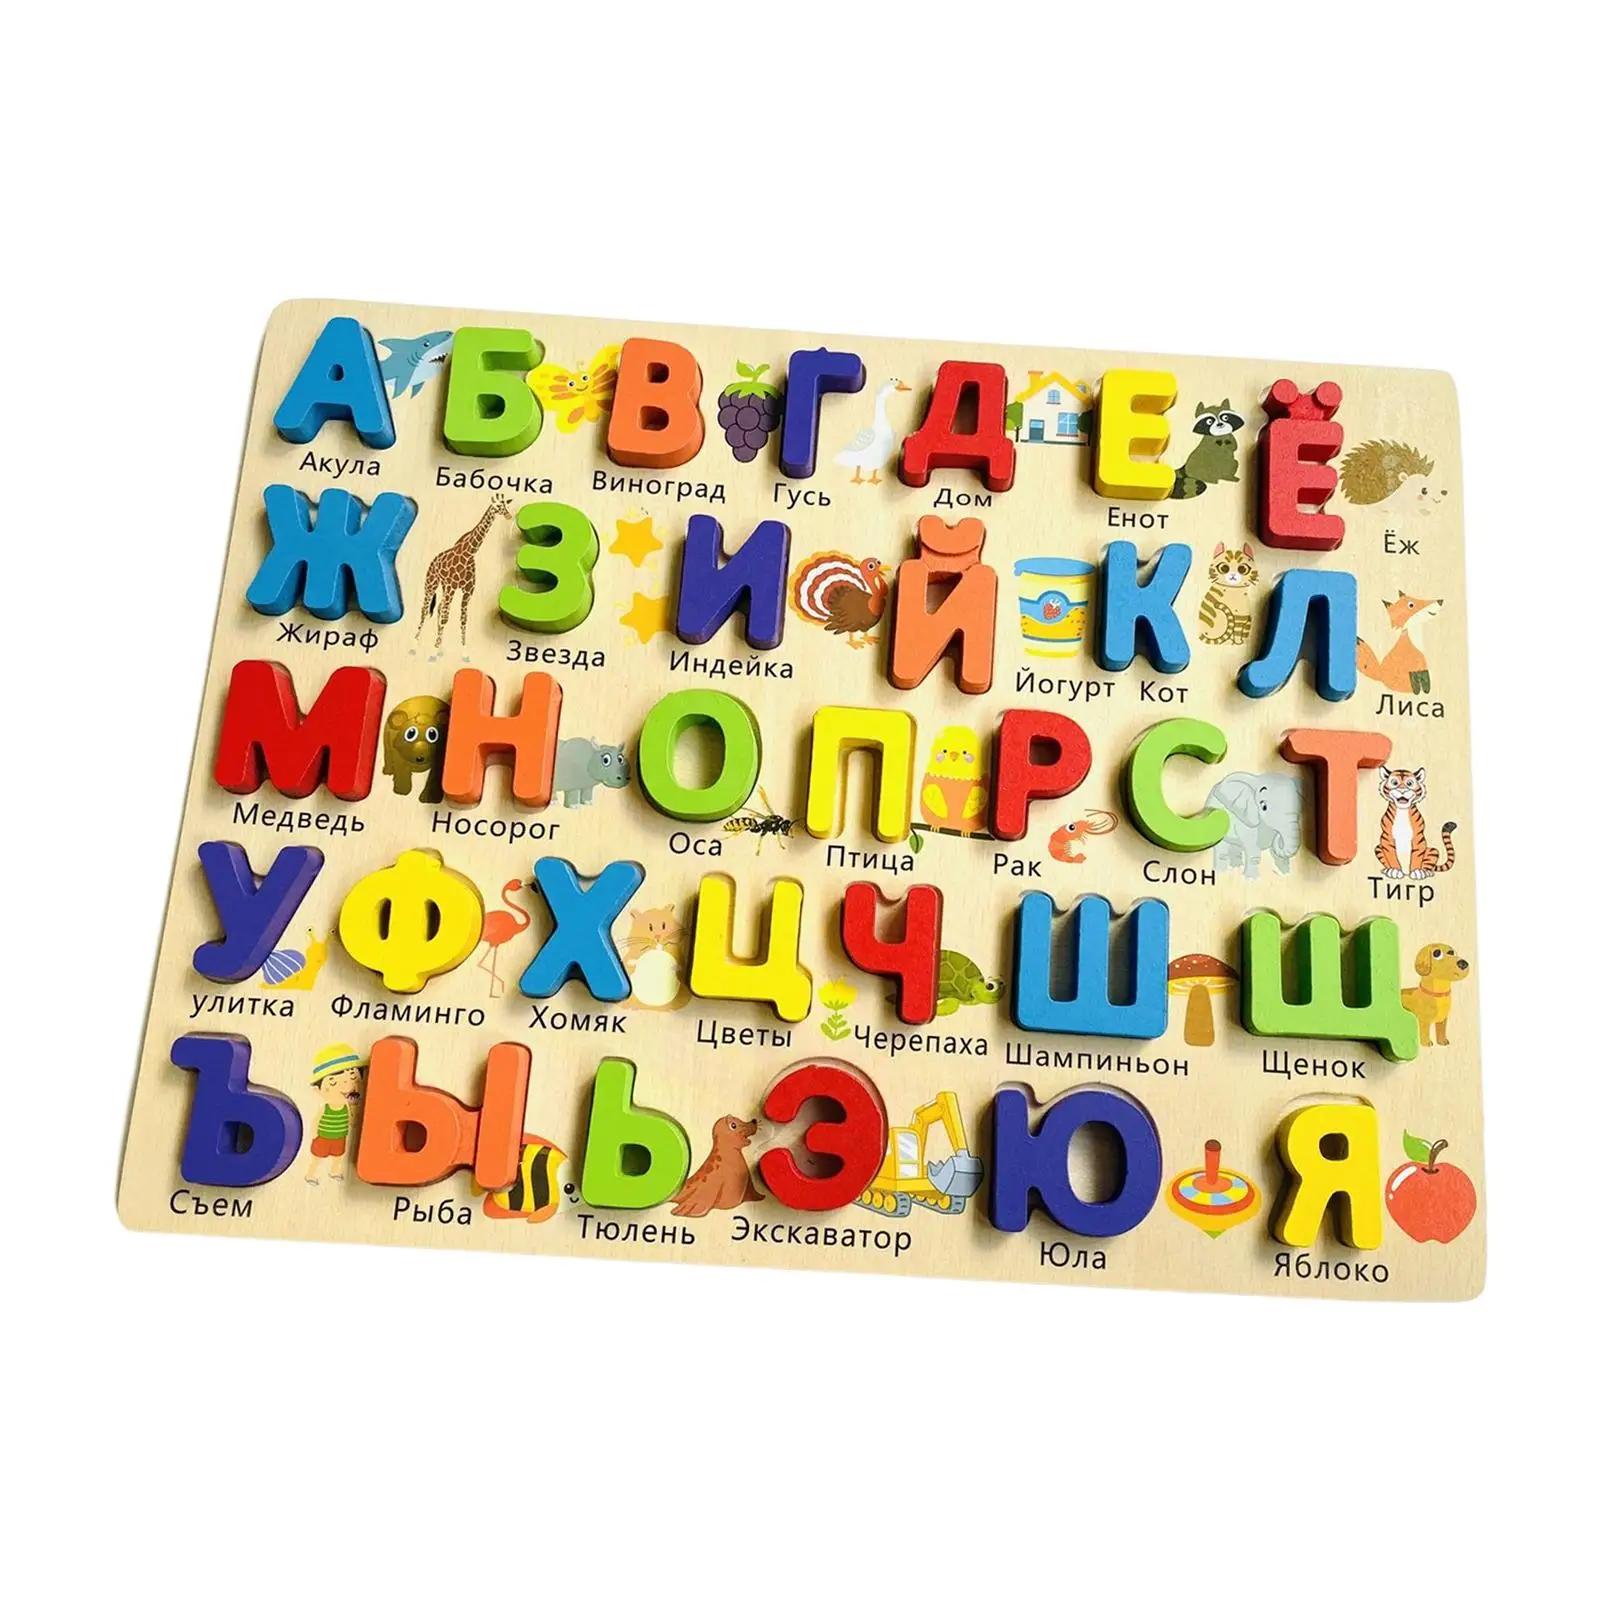 

Russian Alphabet Jigsaw Words Preschool Toy Early Learning Wooden Puzzle Board Set Activities Toy for Best Gifts Children Kids